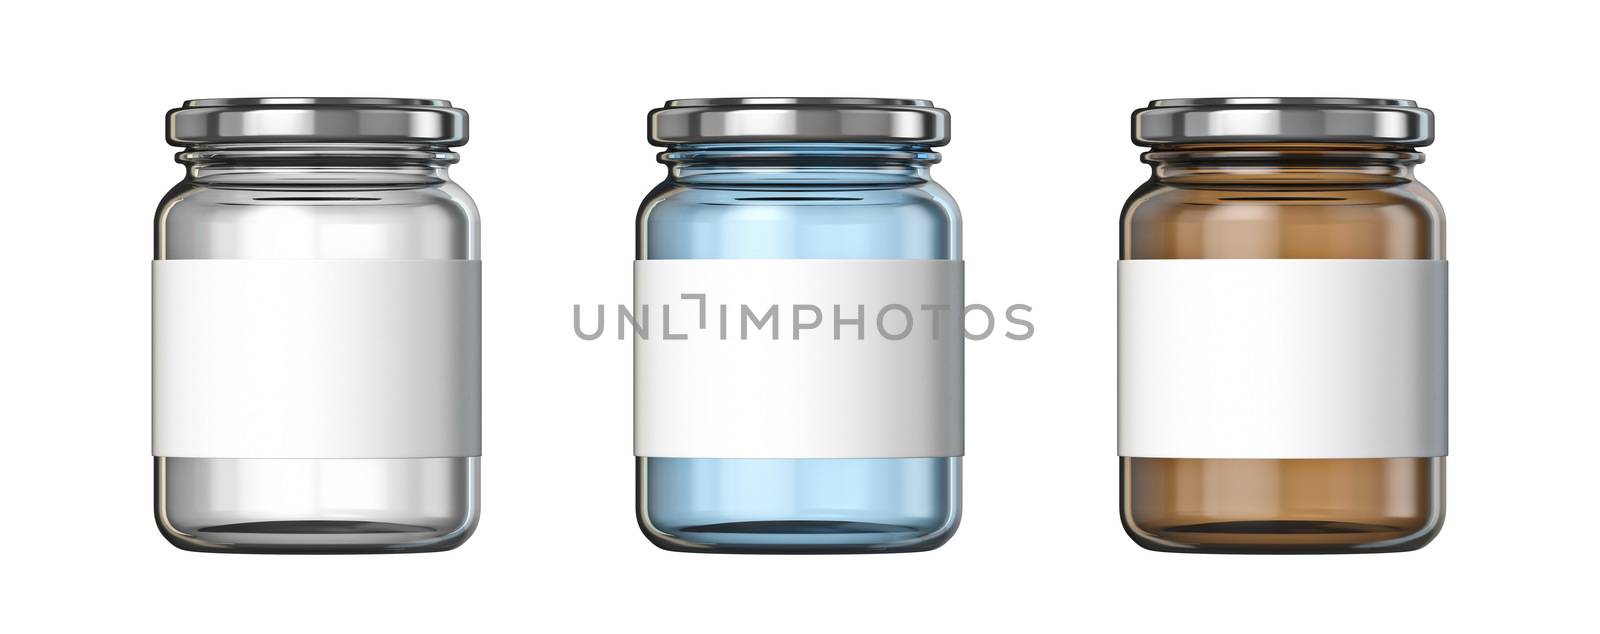 White, blue and brown big glass jars white label 3D render illustration isolated on white background